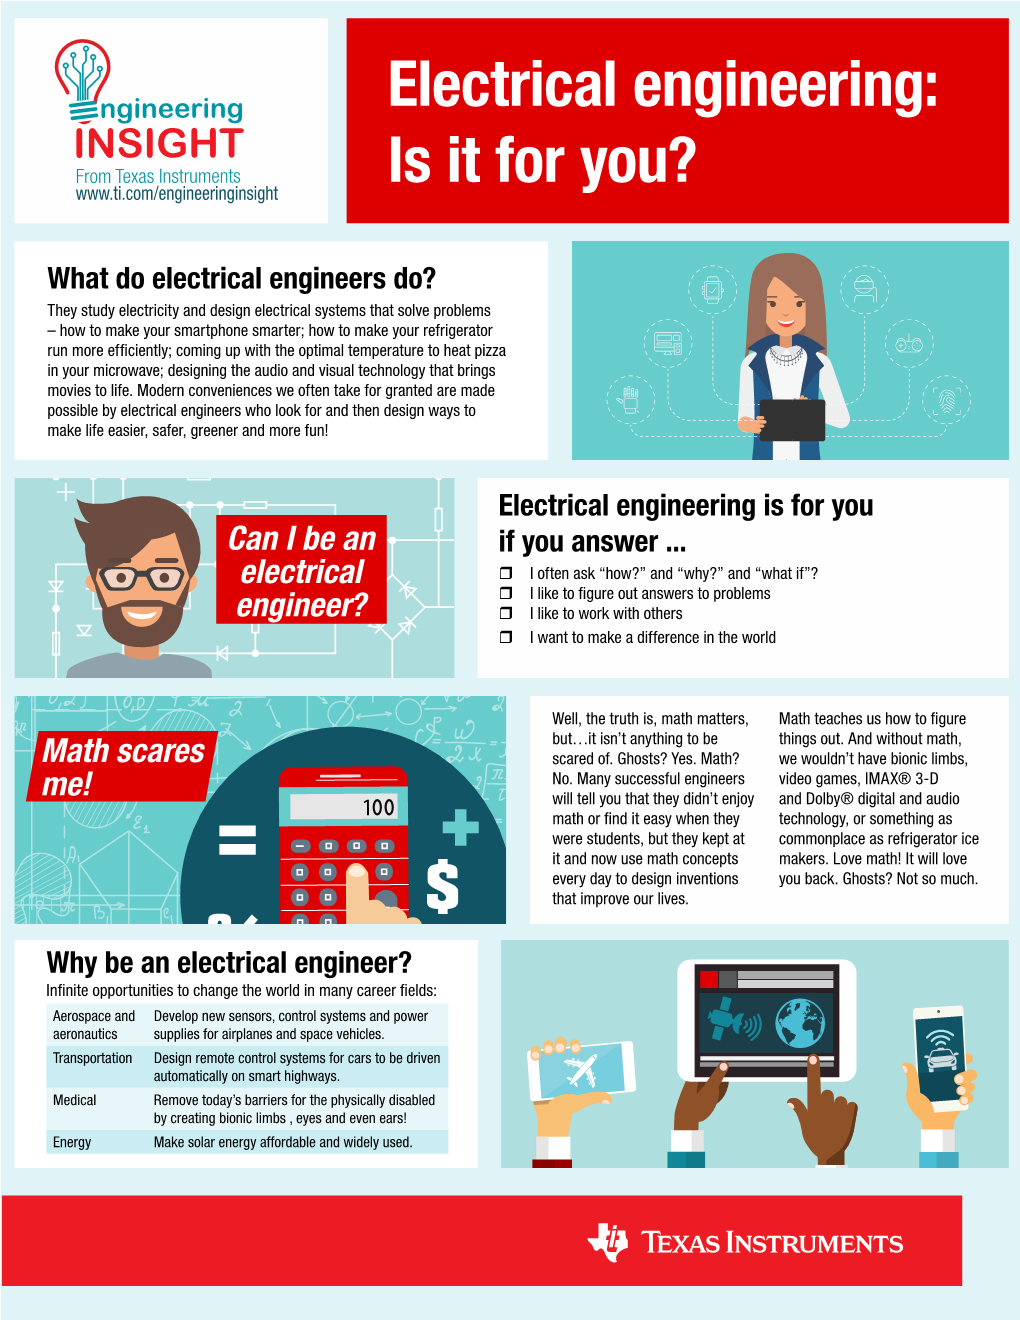 Electrical Engineering: Is It for You?